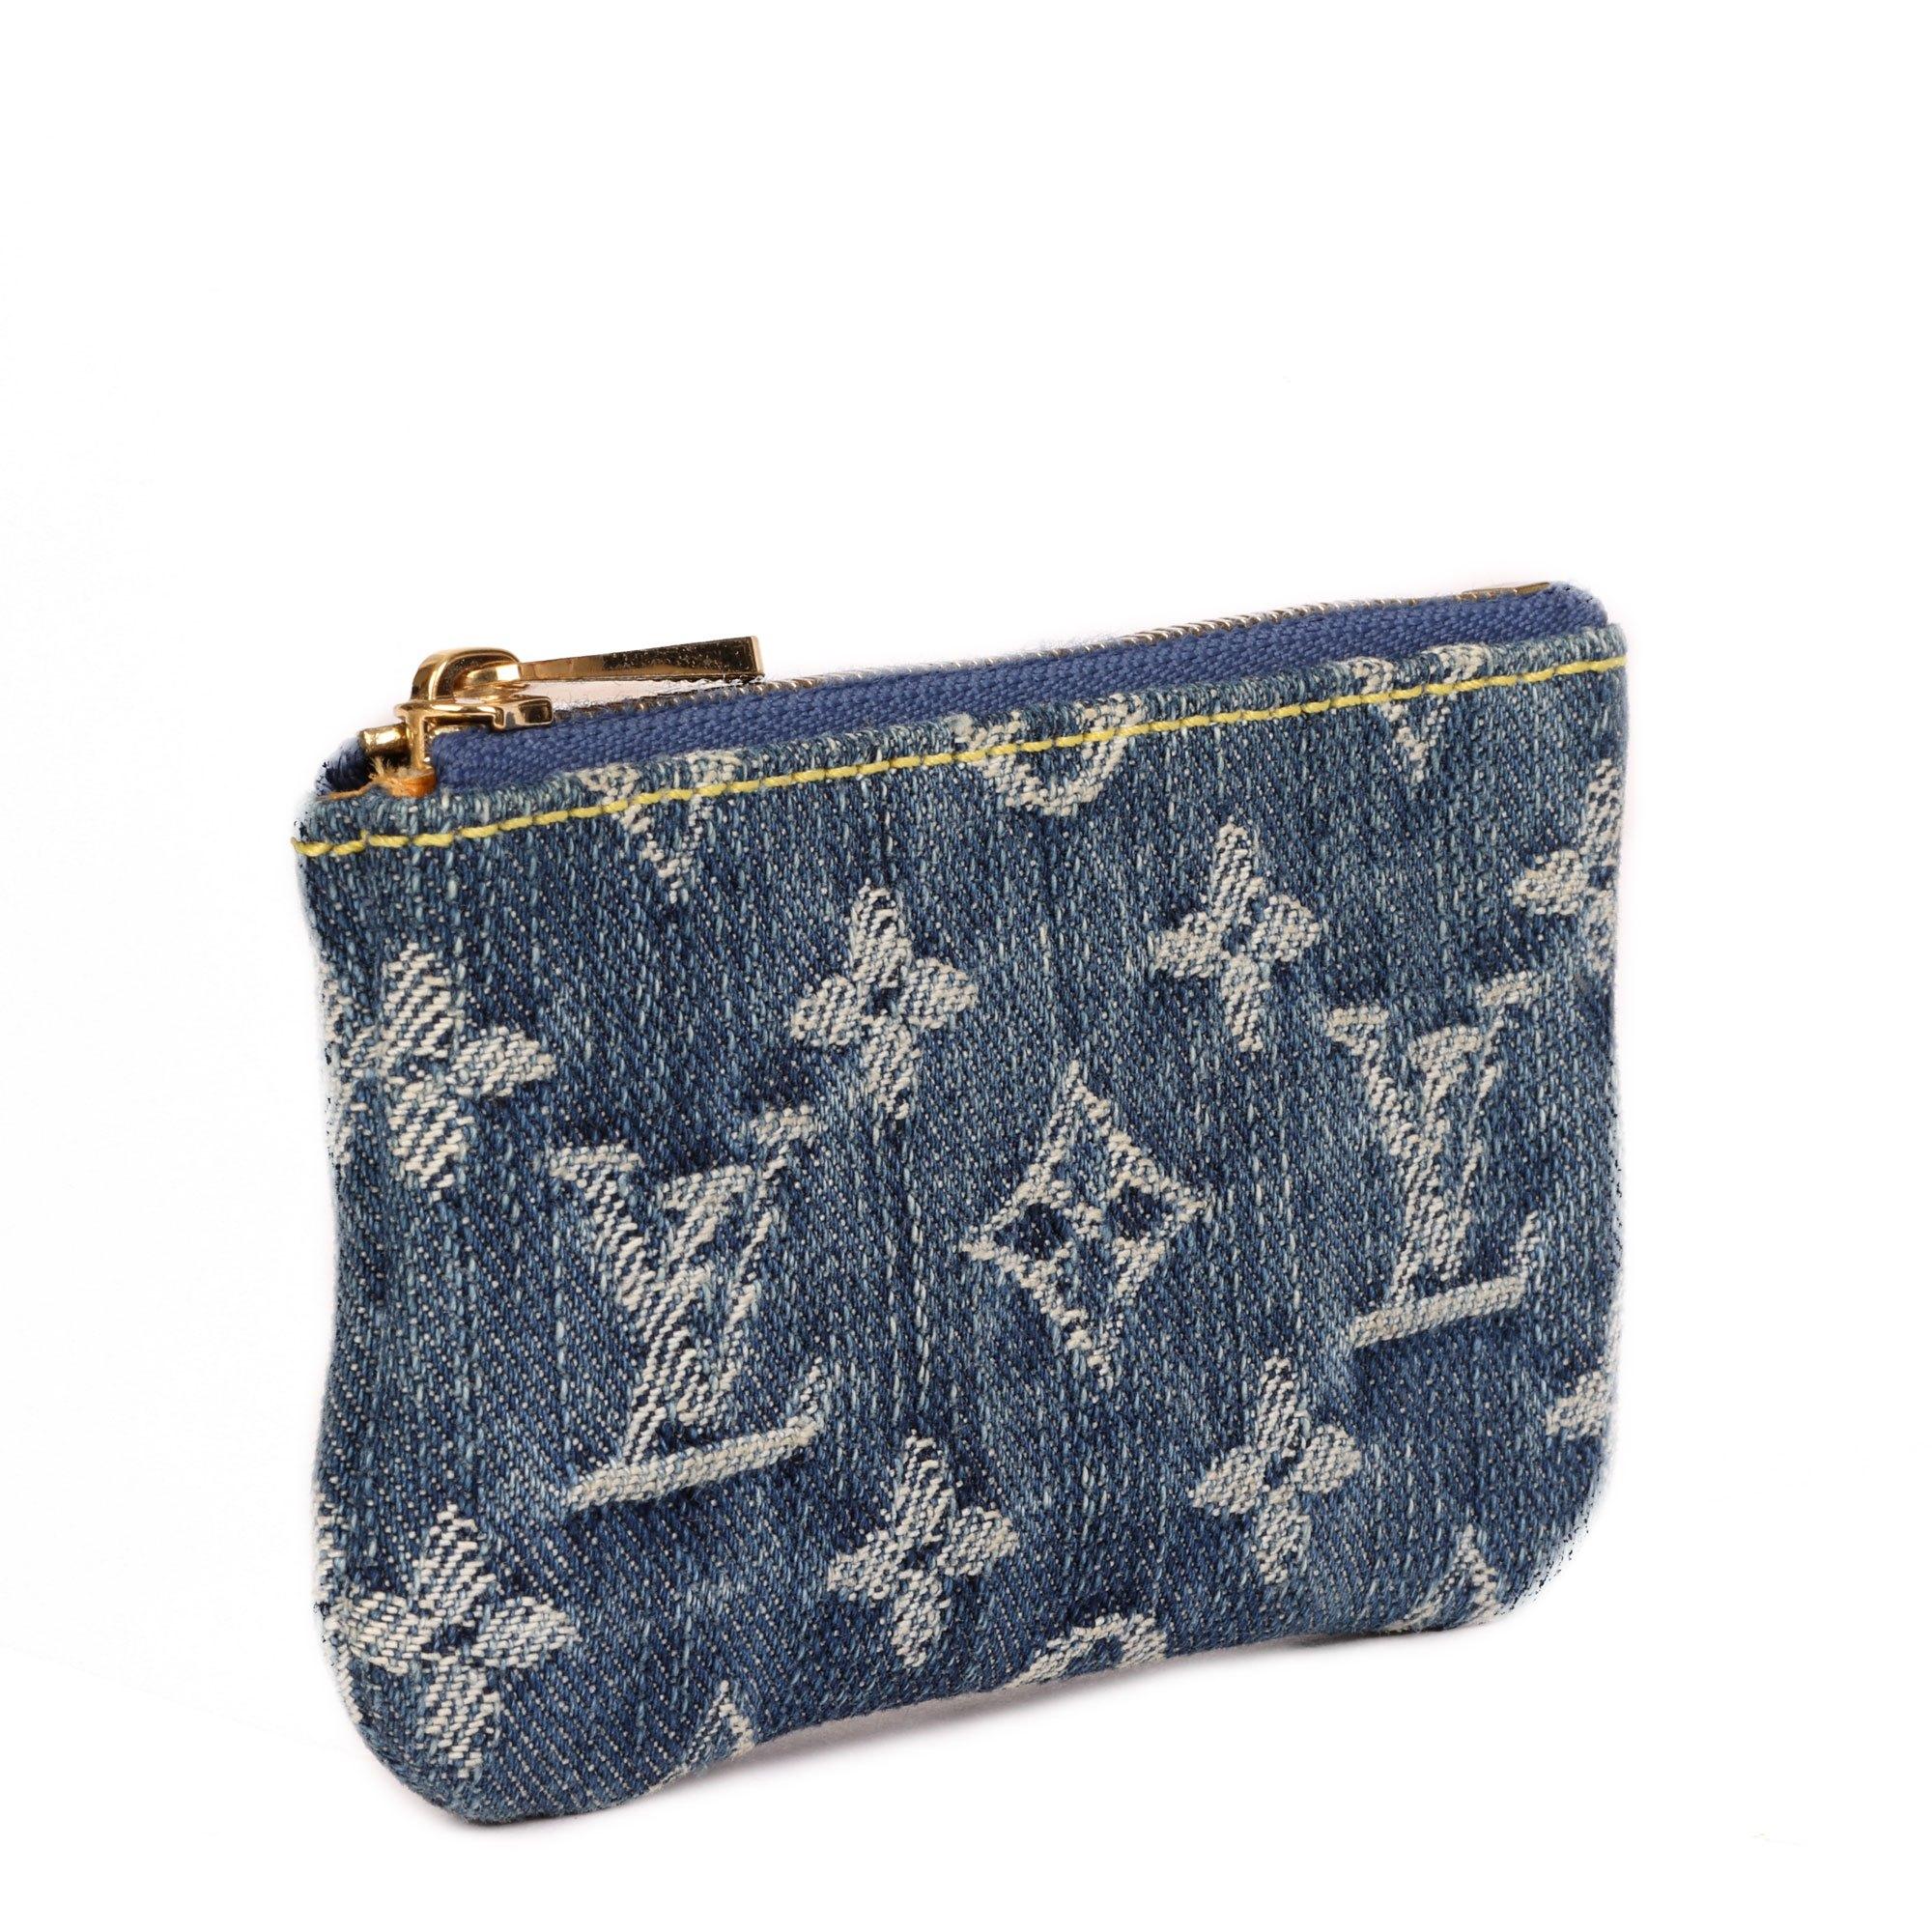 Louis Vuitton BLUE MONOGRAM DENIM POCHETTE CLES

CONDITION NOTES
The exterior is in excellent condition with minimal signs of use.
The interior is in excellent condition with minimal signs of use.
The hardware is in excellent condition with light